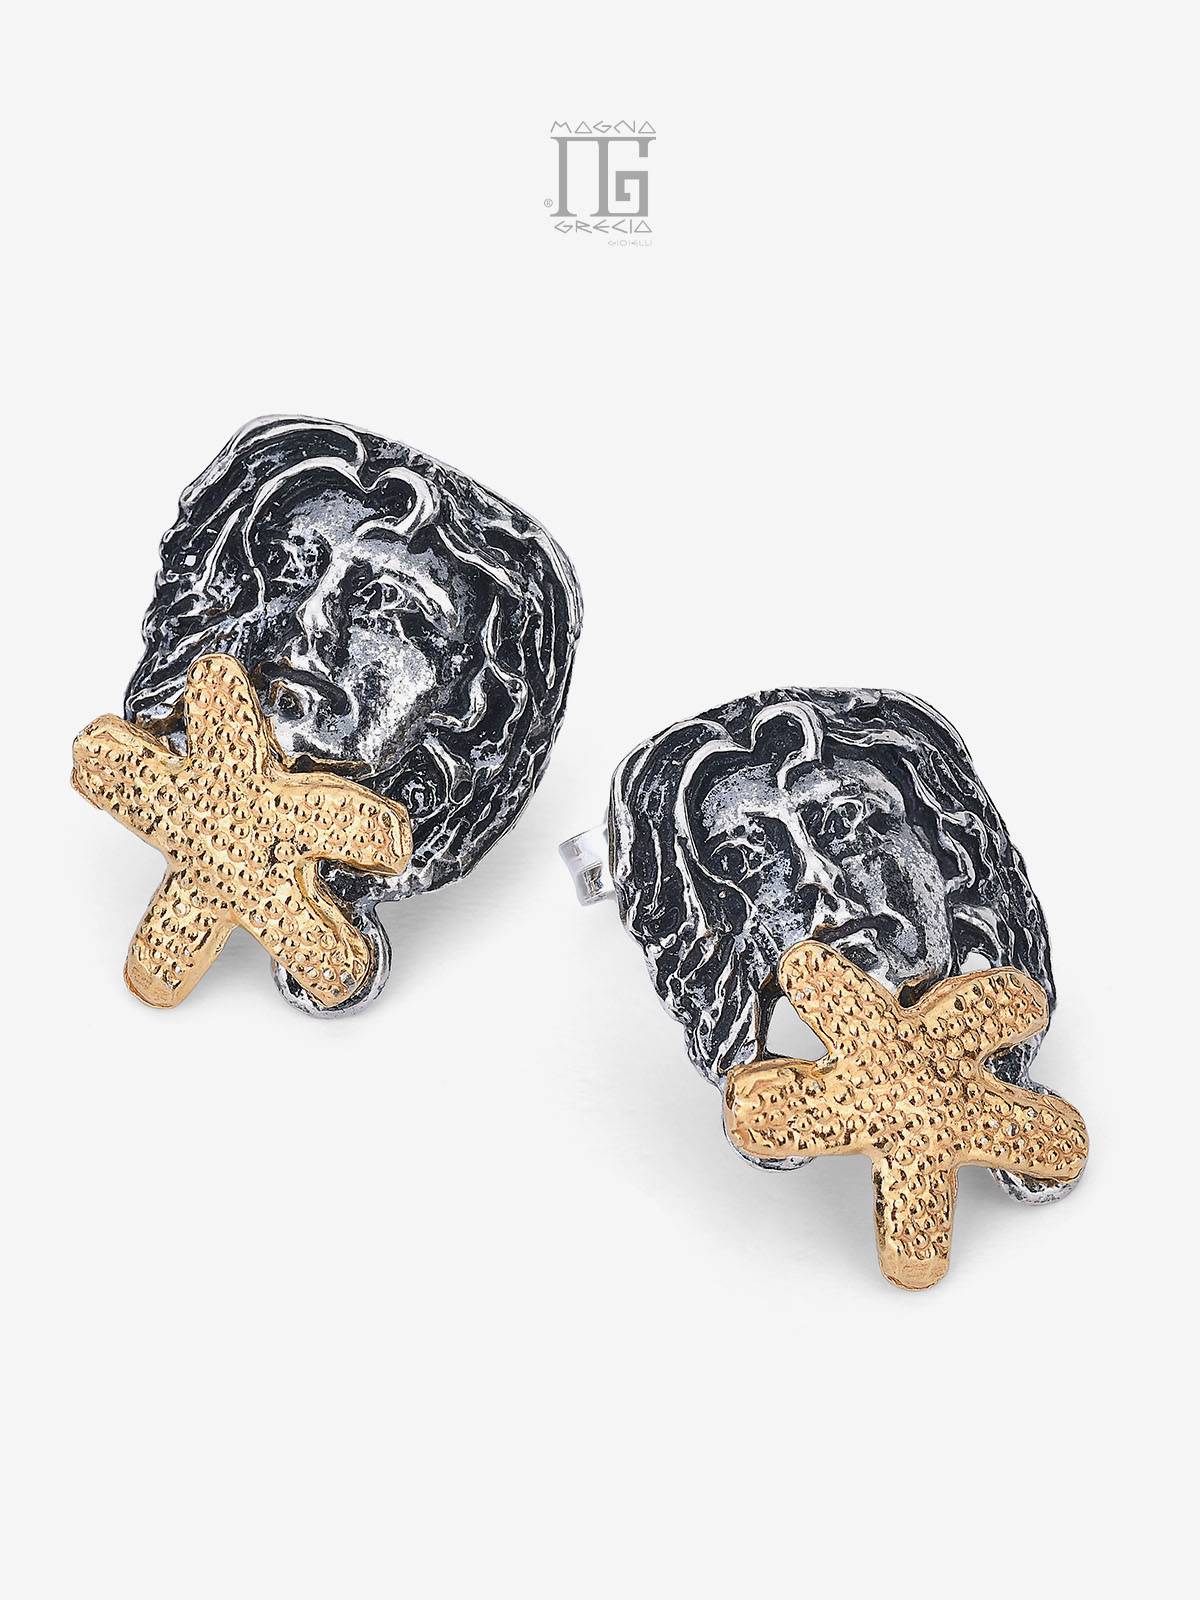 “Summer” earrings in silver depicting the face of the Goddess Venus and Starfish Cod. MGK 4257 V-2